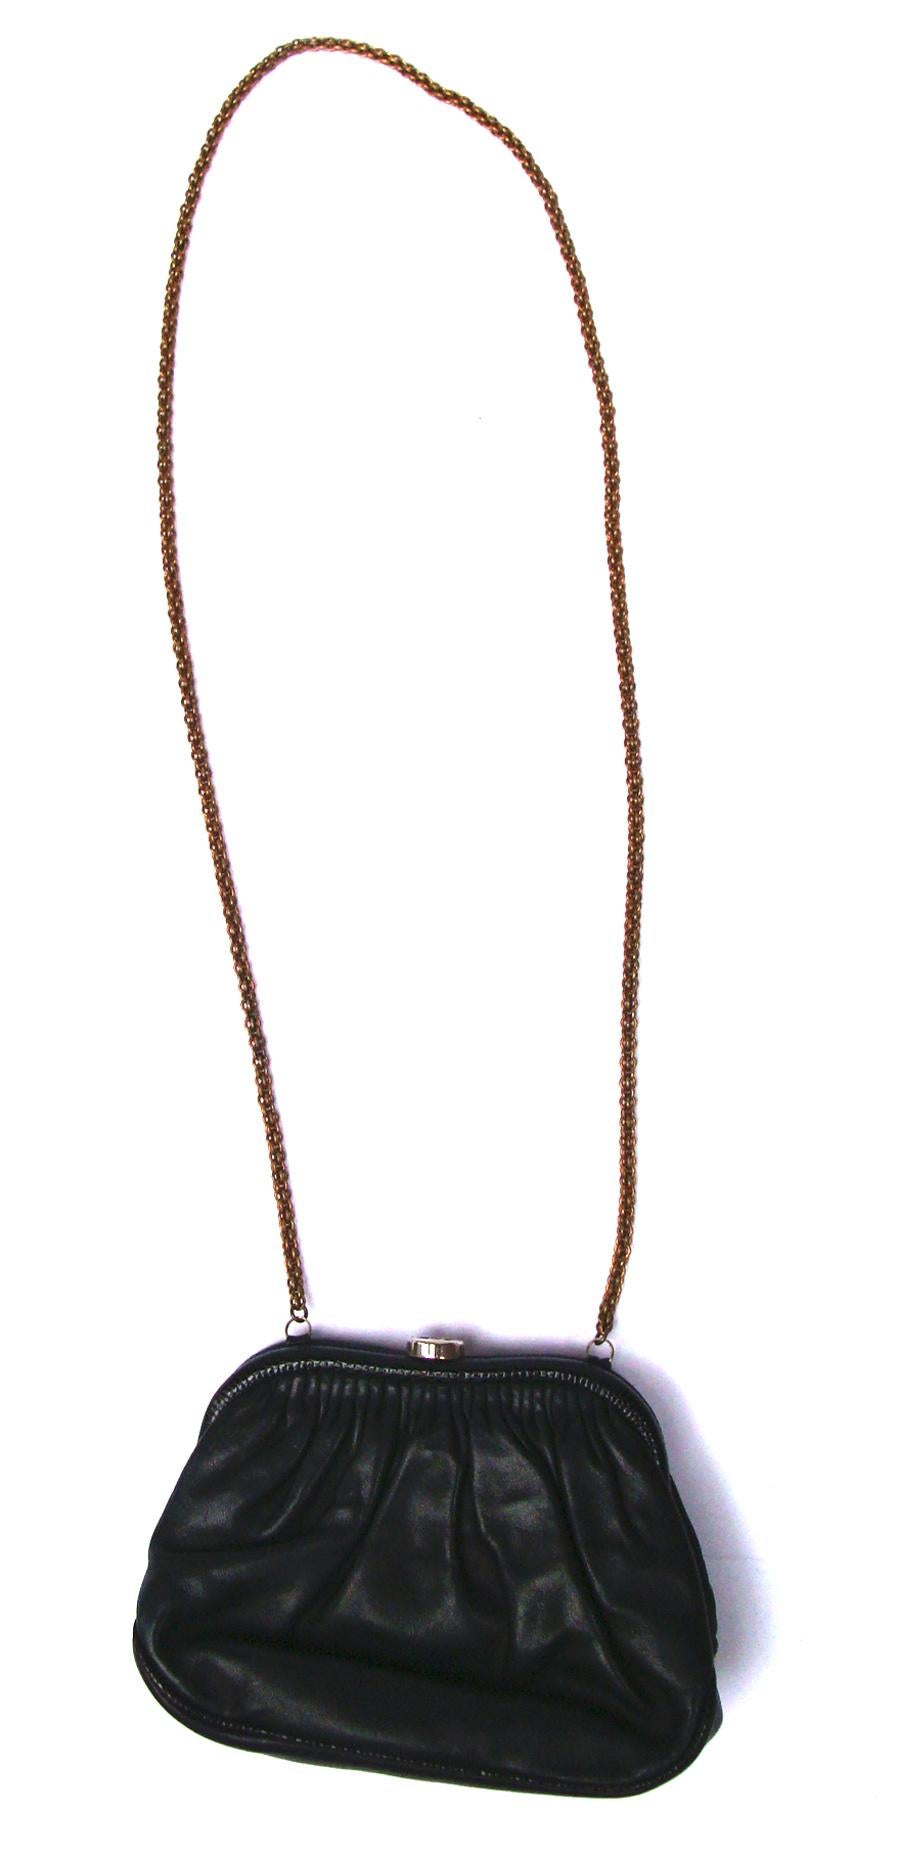 Timeless and classic.  This Chanel lambskin & lizard evening bag has its original long chain strap.  Black lambskin leather with black lizard pull tab, piping & wrapped frame.  The ruching on both sides of the bag  provides the spacious interior. 